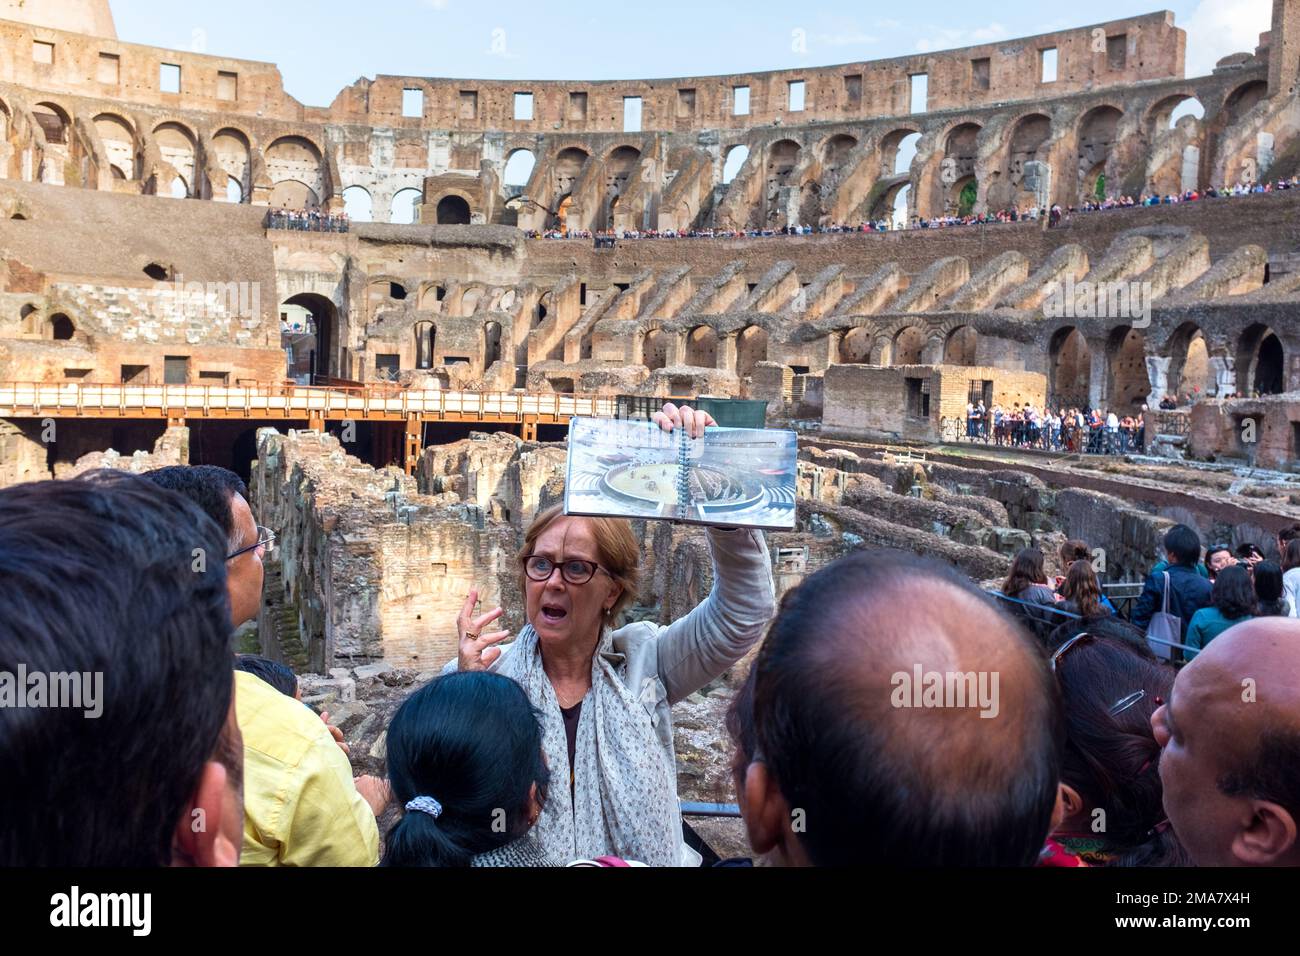 People in the Colosseum ancient amphitheatre and arena in Rome the Italian capital Stock Photo